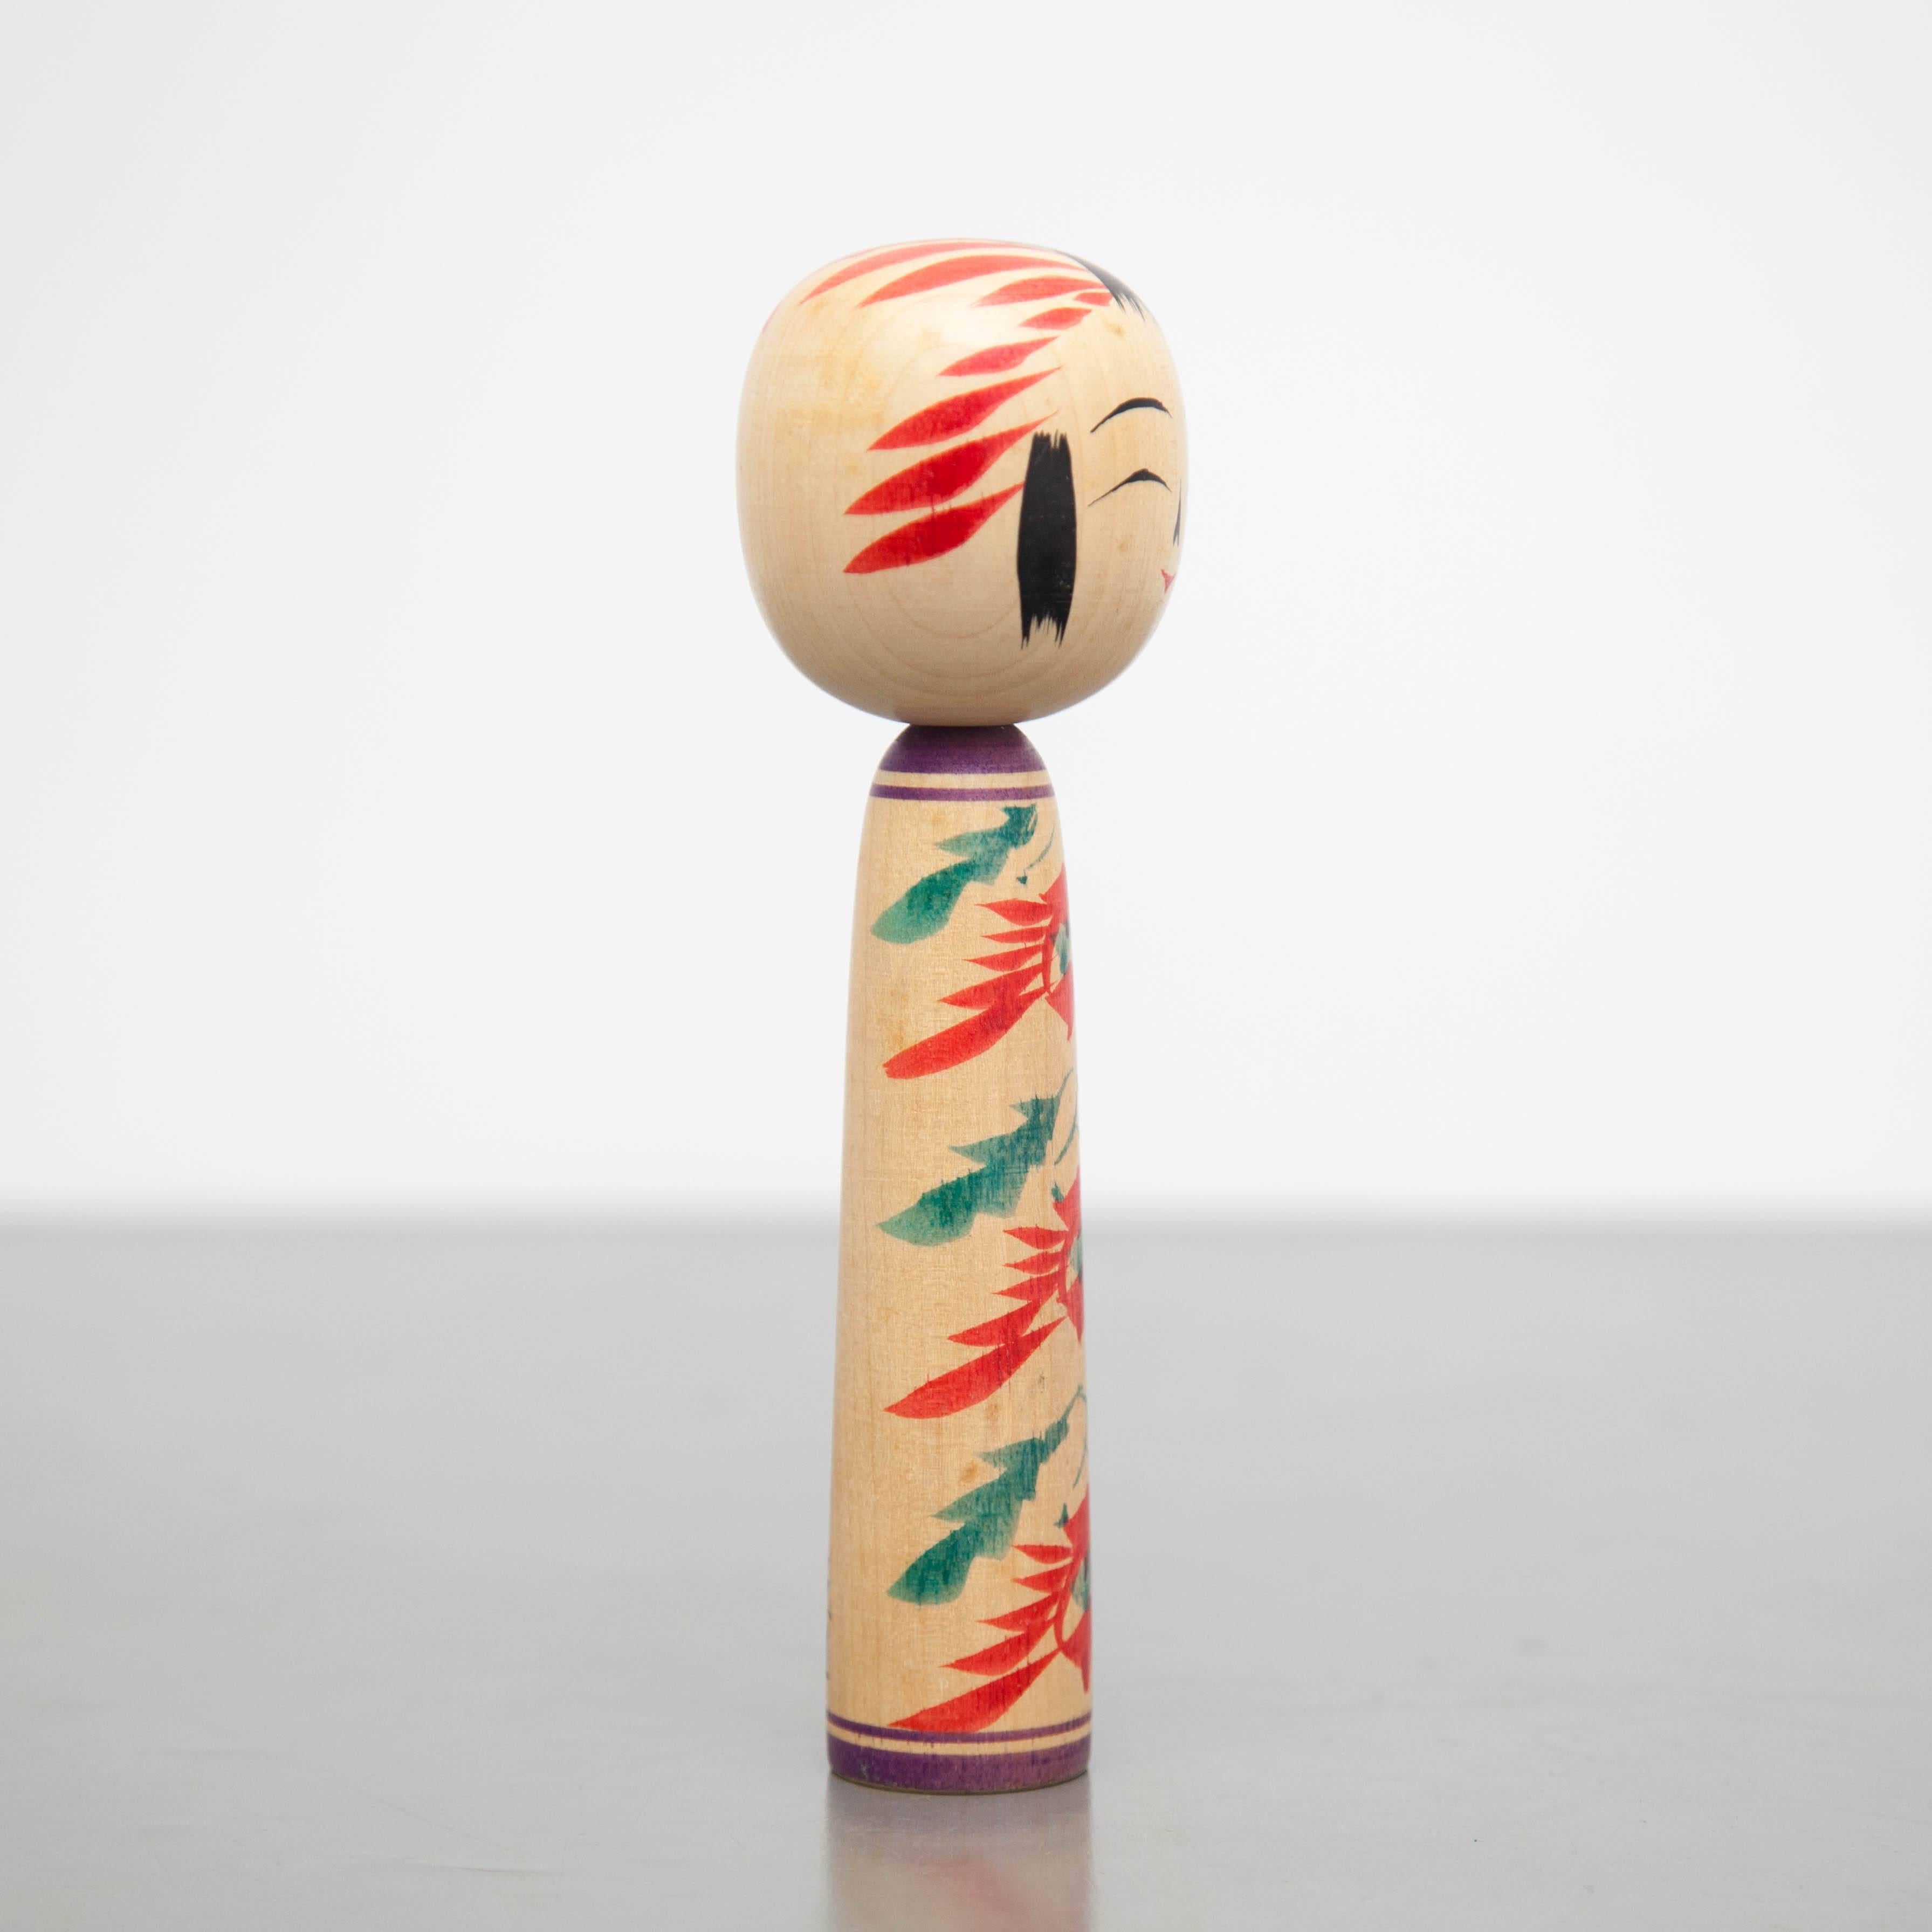 Japanese doll called Kokeshi of the early 20th century.
Provenance from the northern Japan.
Dolls shapes and patterns are particular to a certain area and are classified under eleven types, this doll is a Tsuchiyu type.

Handmade by Japanese